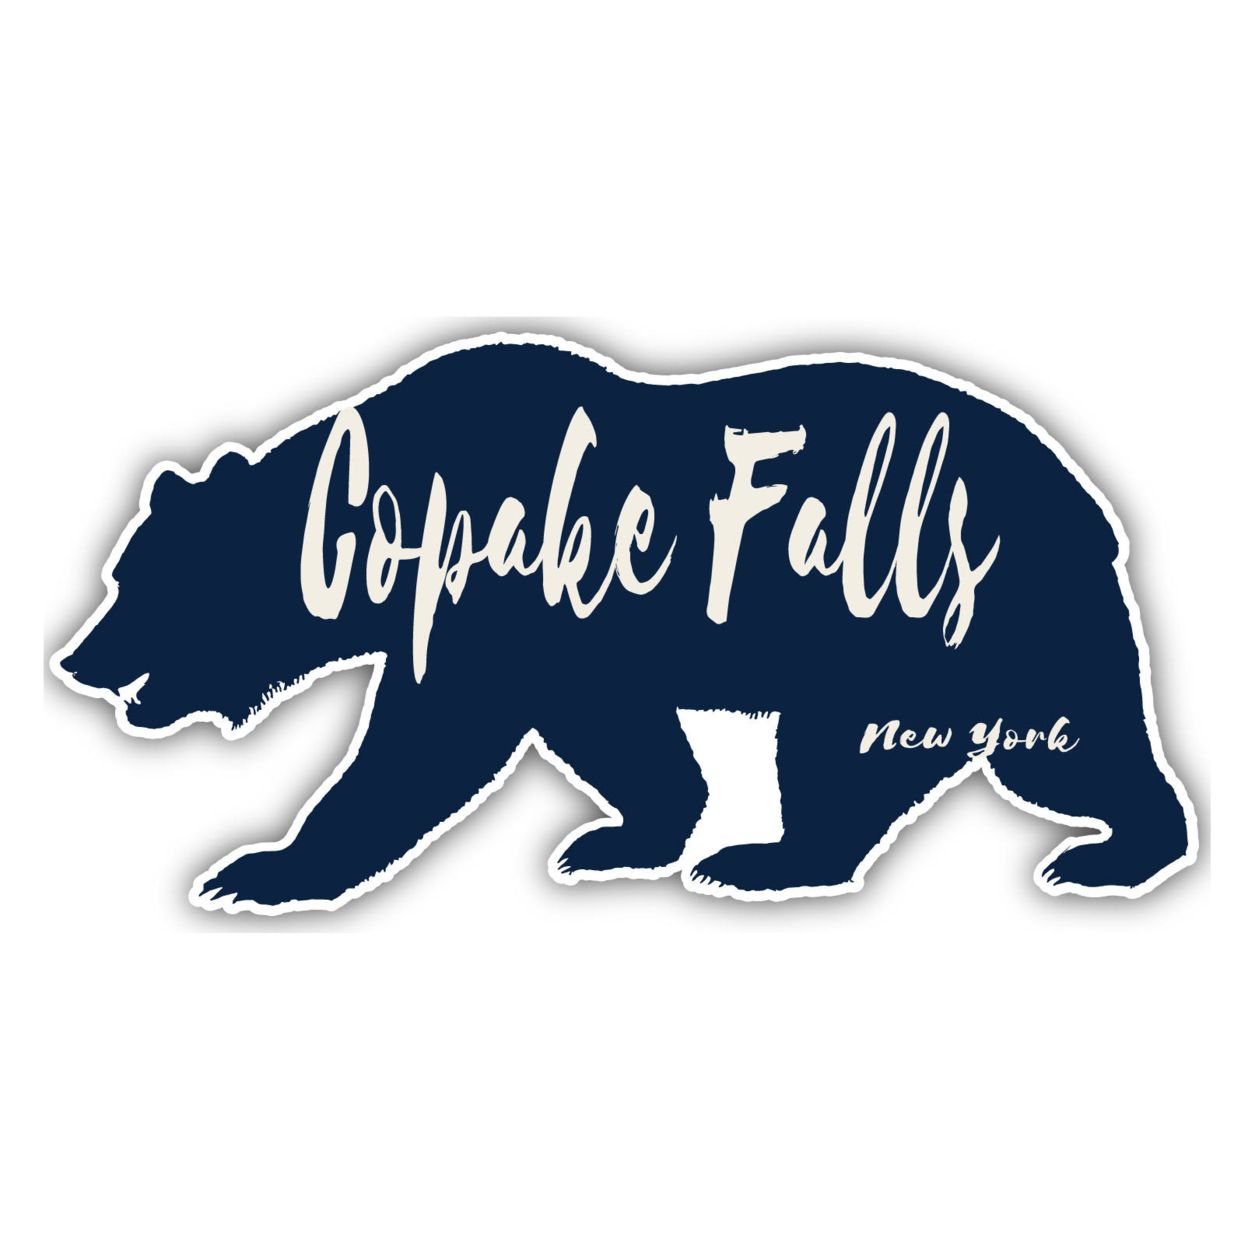 Copake Falls New York Souvenir Decorative Stickers (Choose Theme And Size) - 4-Pack, 6-Inch, Bear